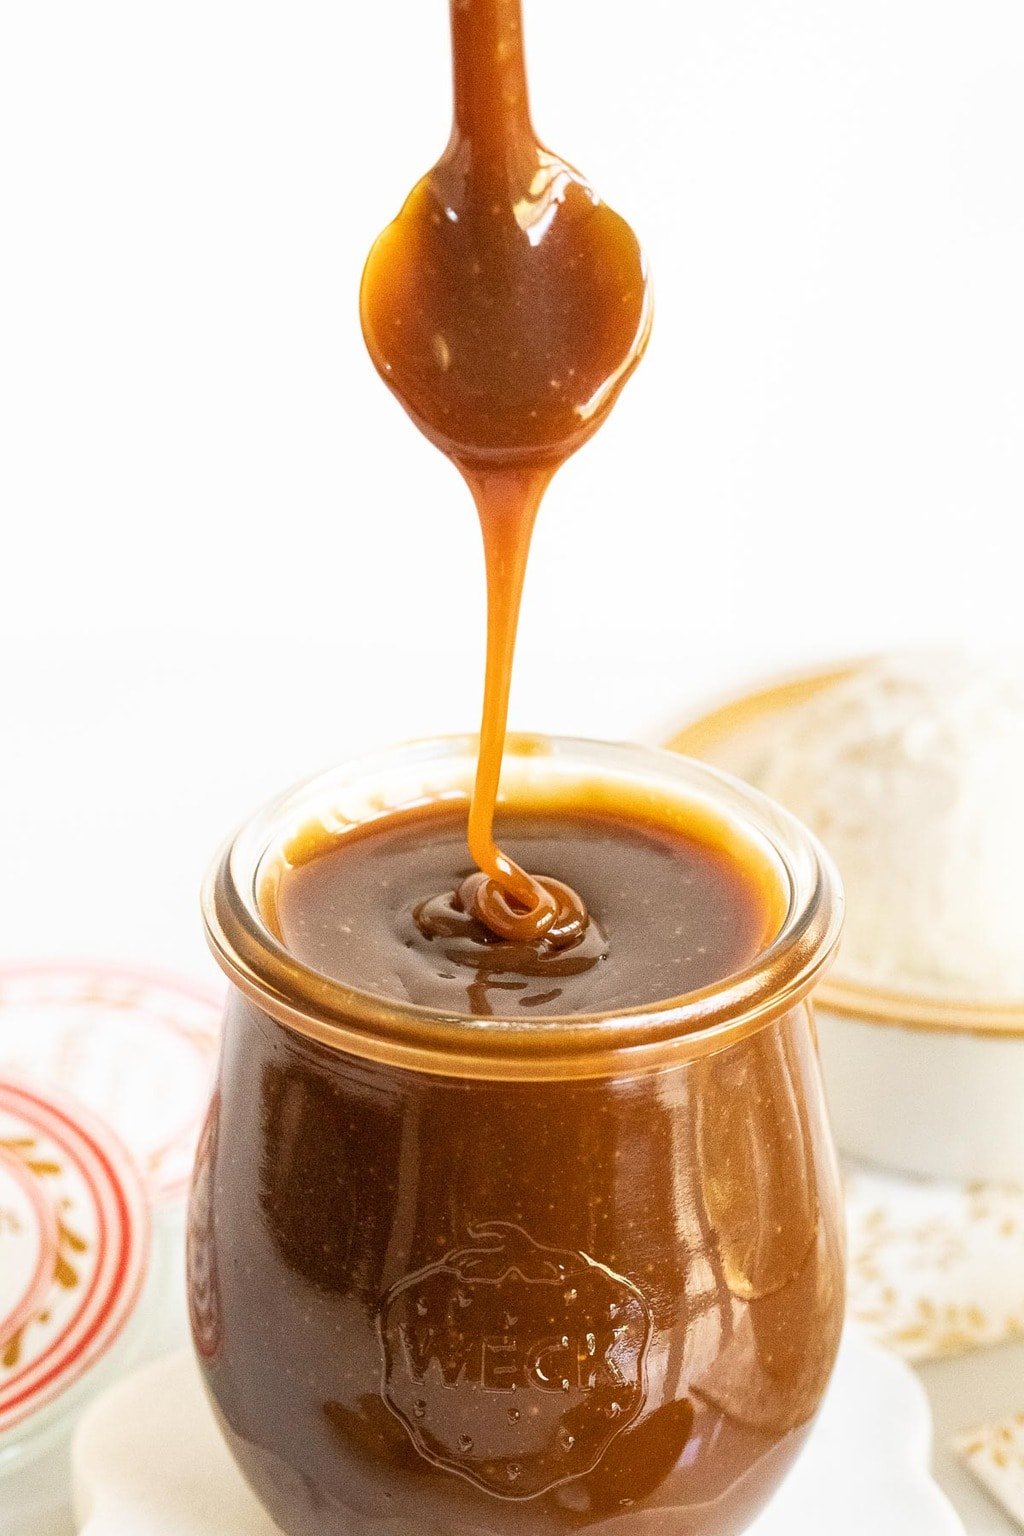 Vertical closeup photo of a Weck glass jar filled with Ridiculously Easy Butterscotch Sauce and a spoon pouring the sauce back into the jar from above.